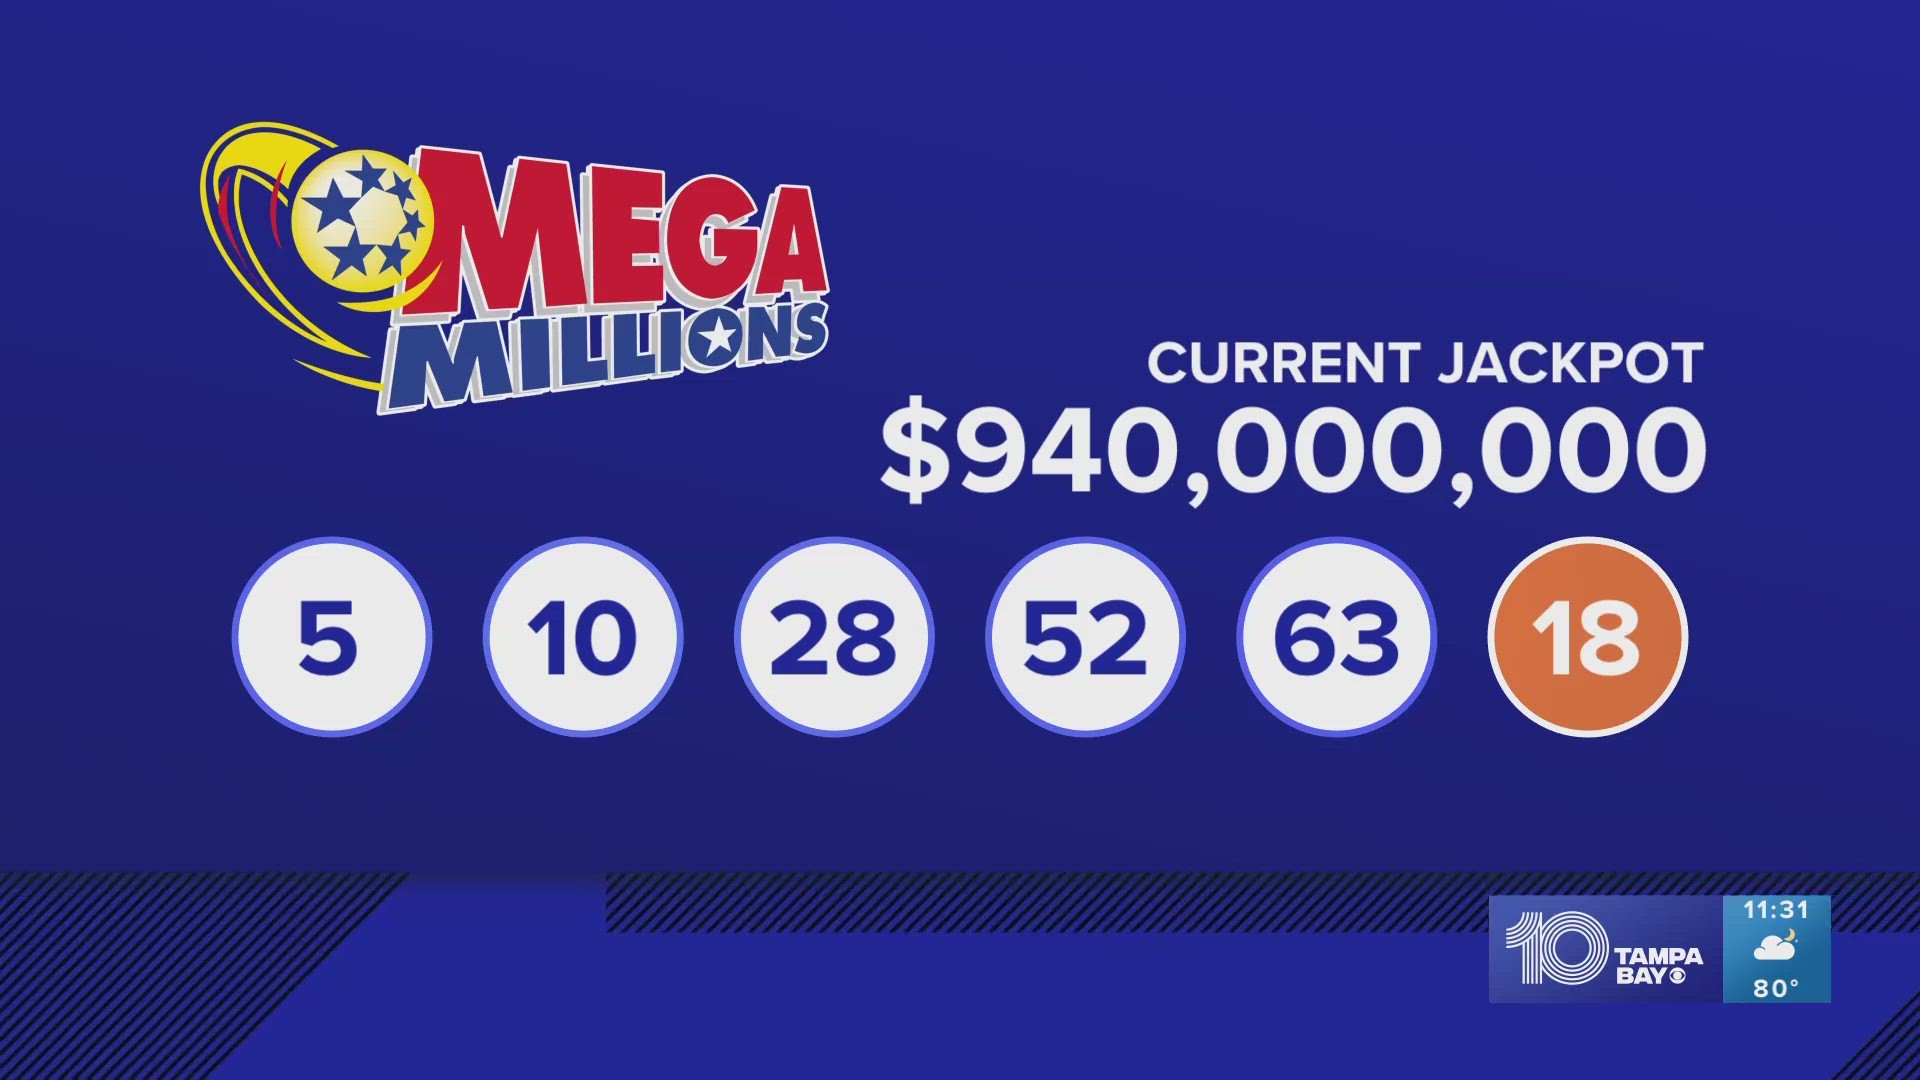 There have been 28 straight Mega Millions drawings without a jackpot winner.